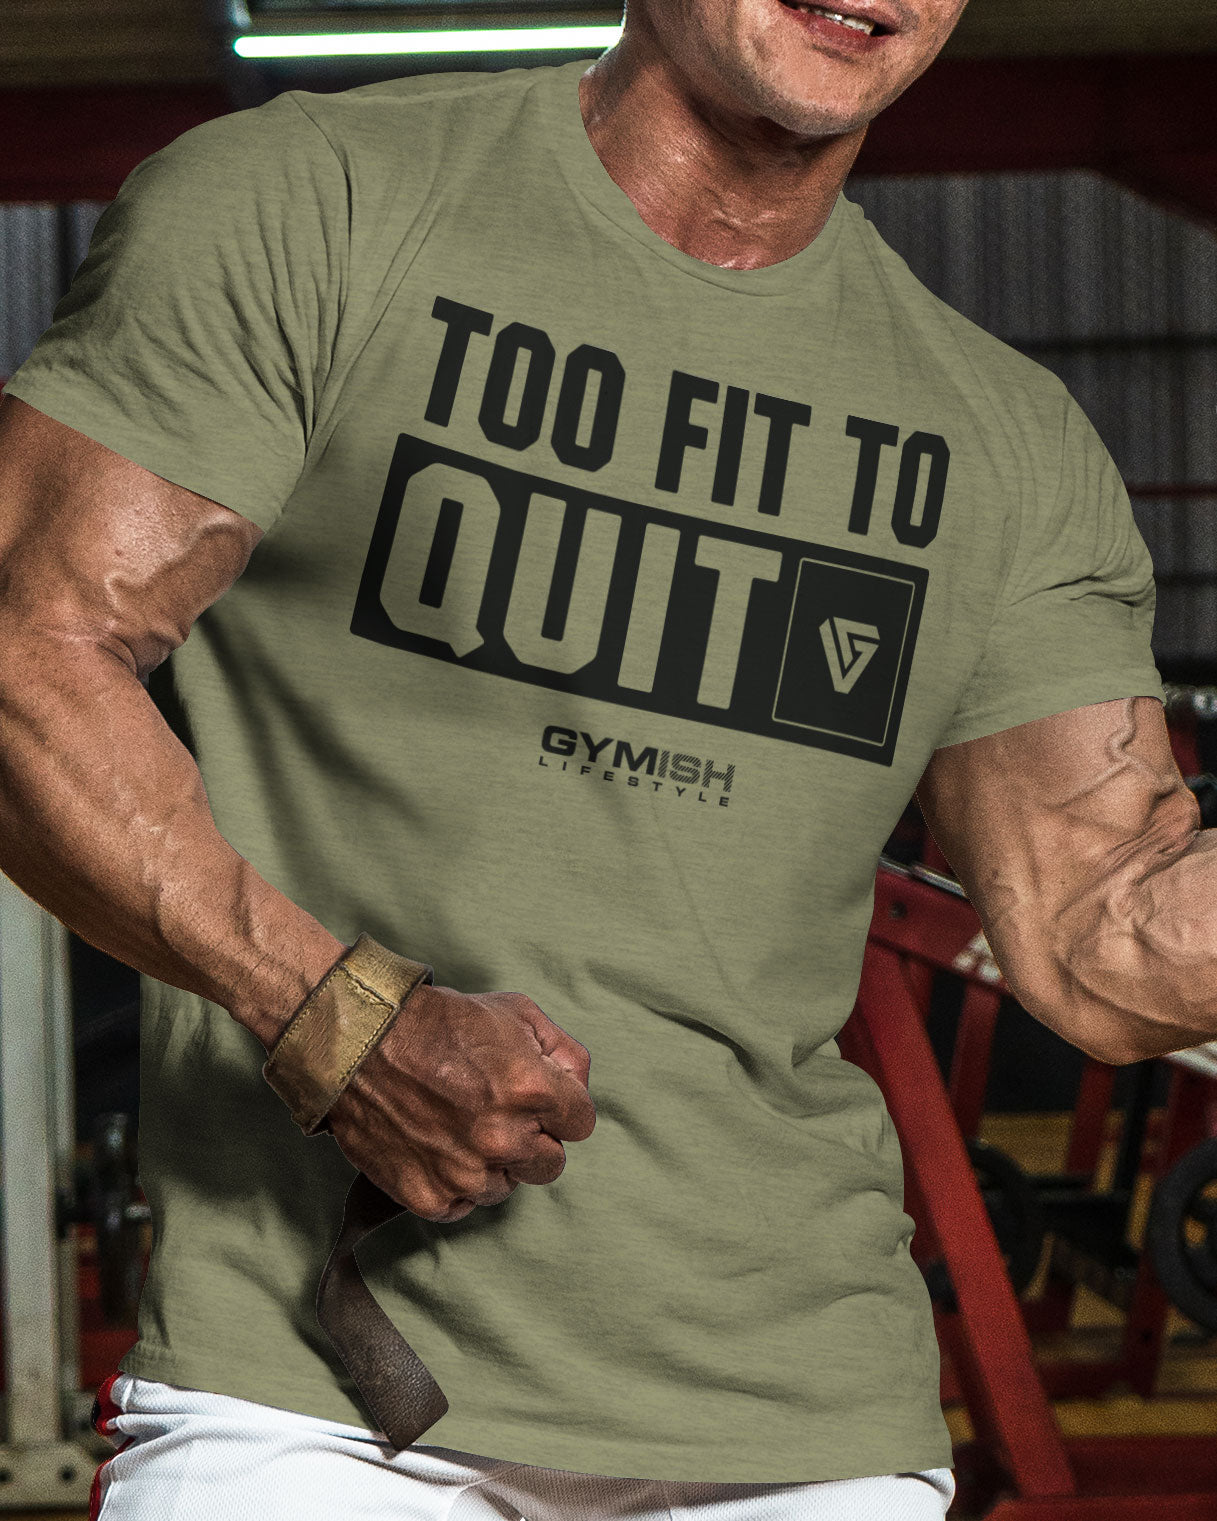 088. Too Fit To Quit Motivational Gym Shirt Funny T-Shirt, Workout Shirts for Men